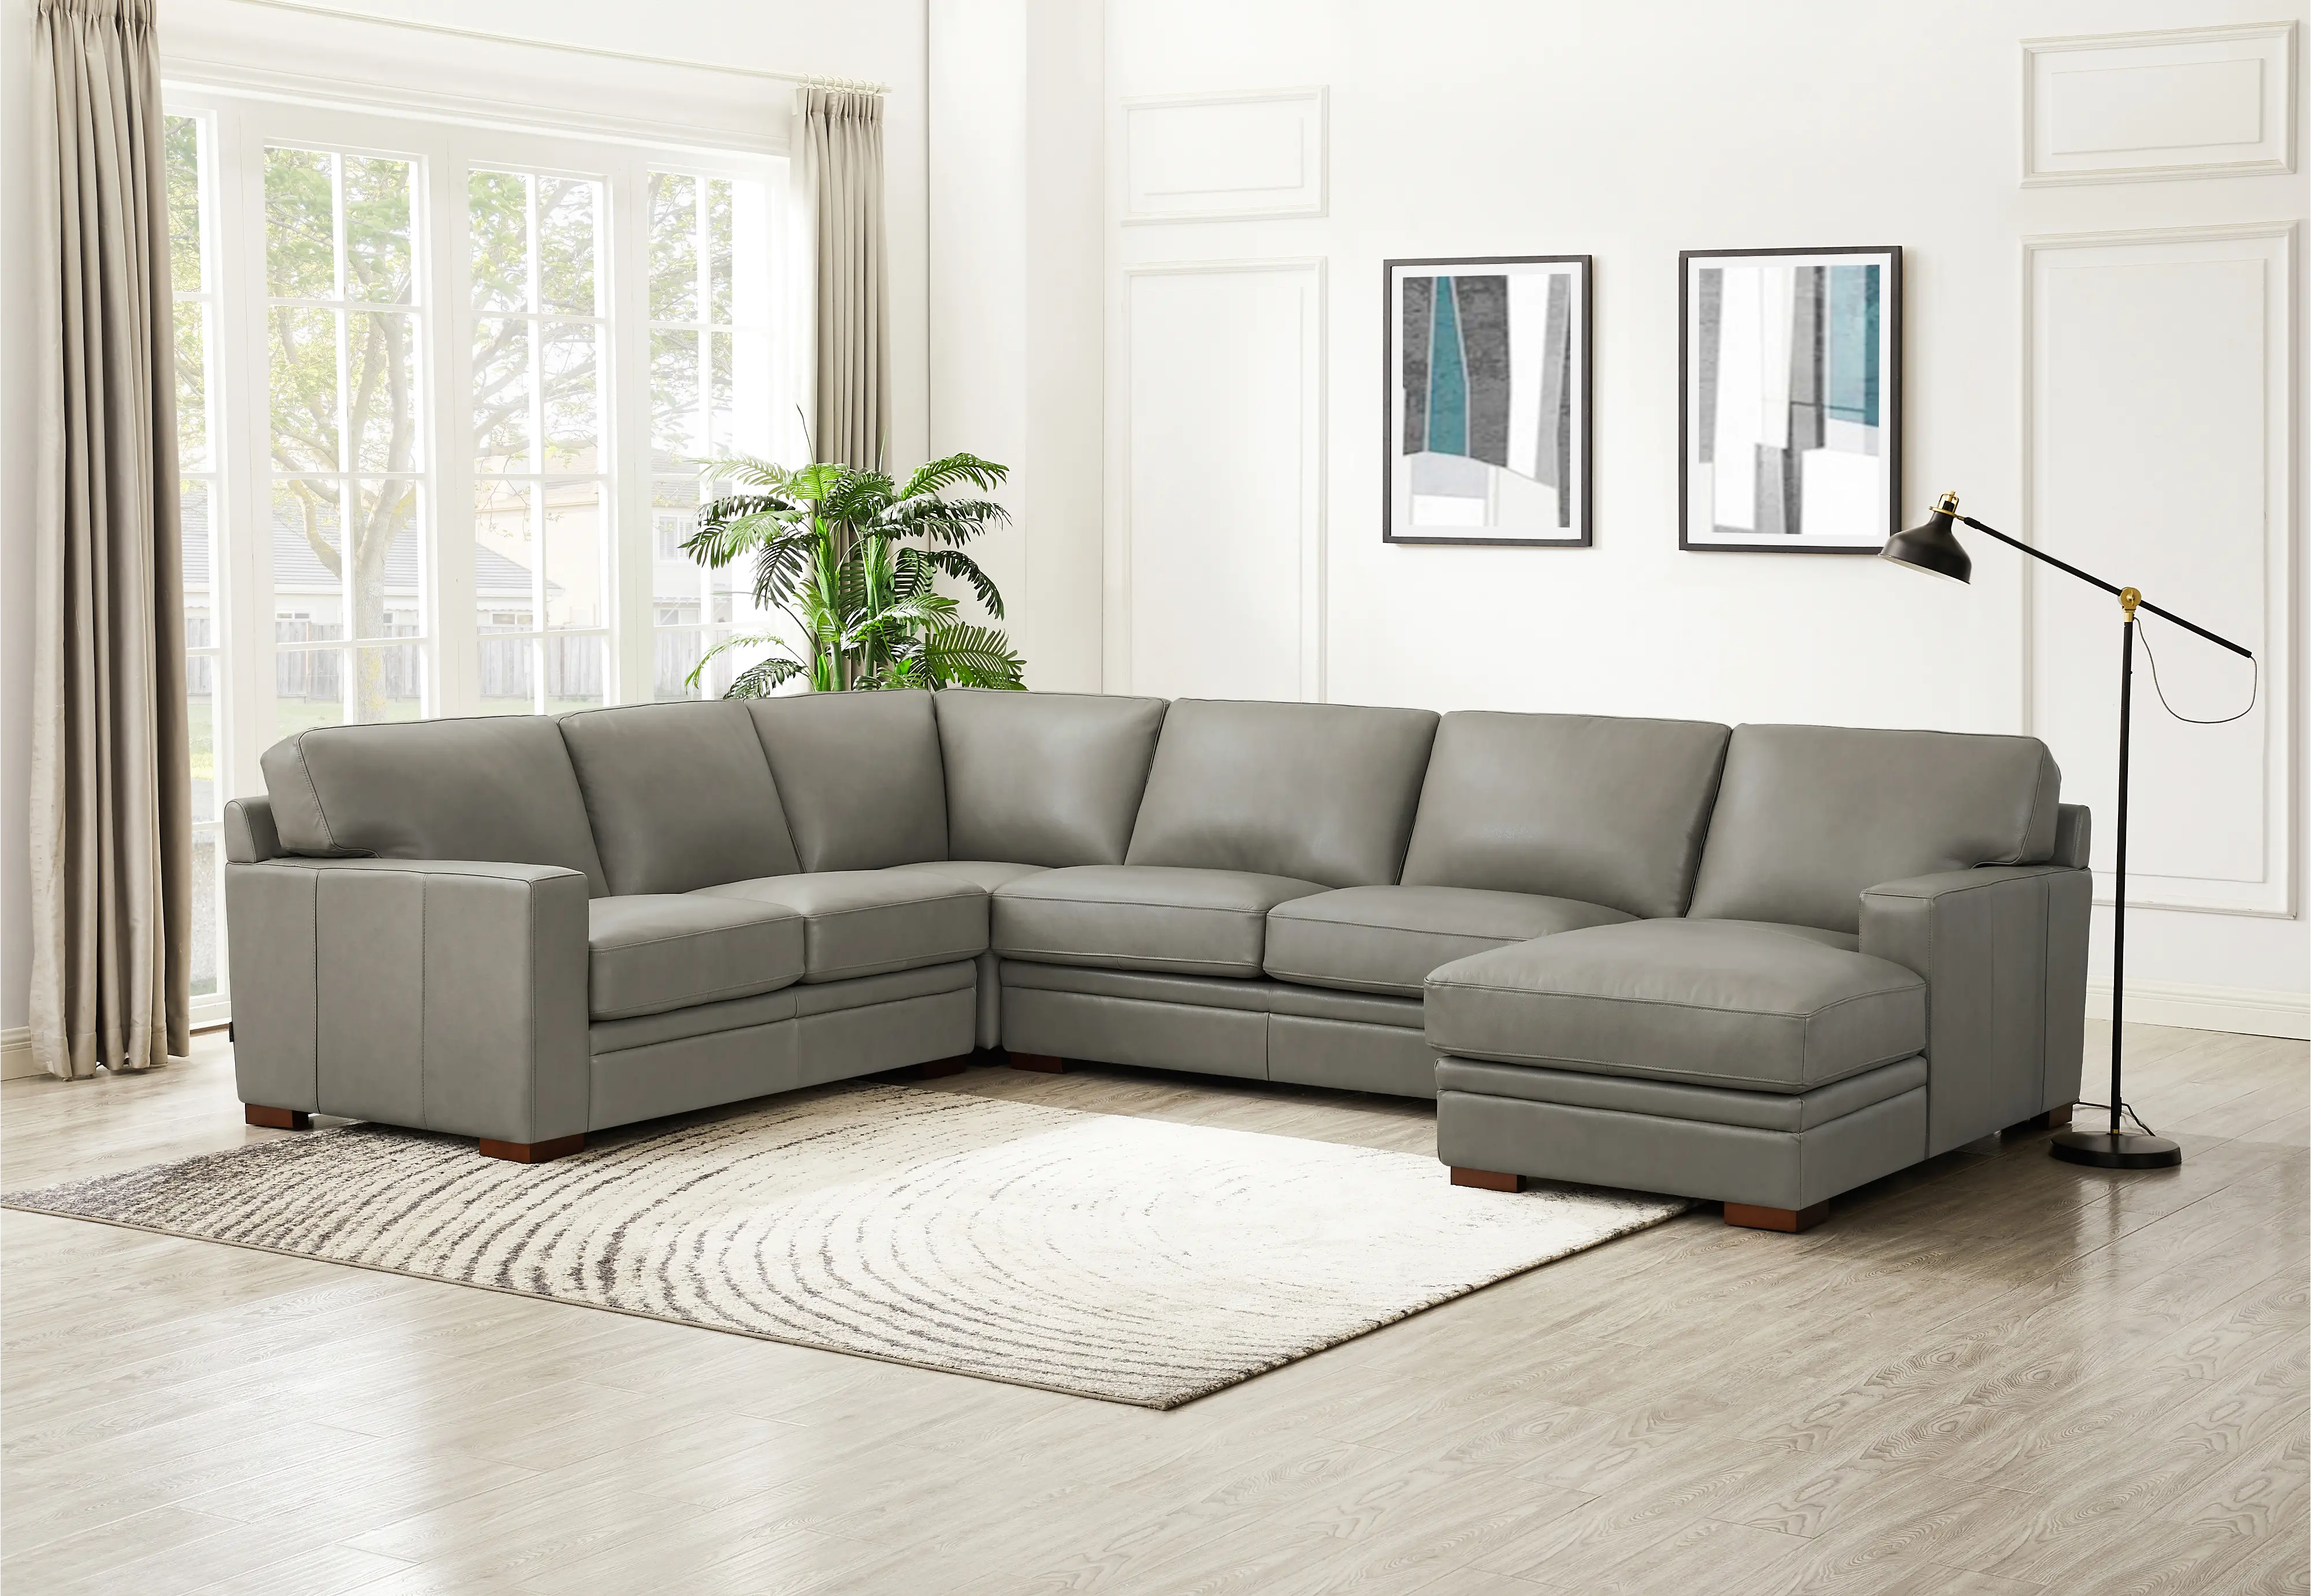 Chatsworth Gray Leather 4 Piece Sectional with Right-Facing Chaise...